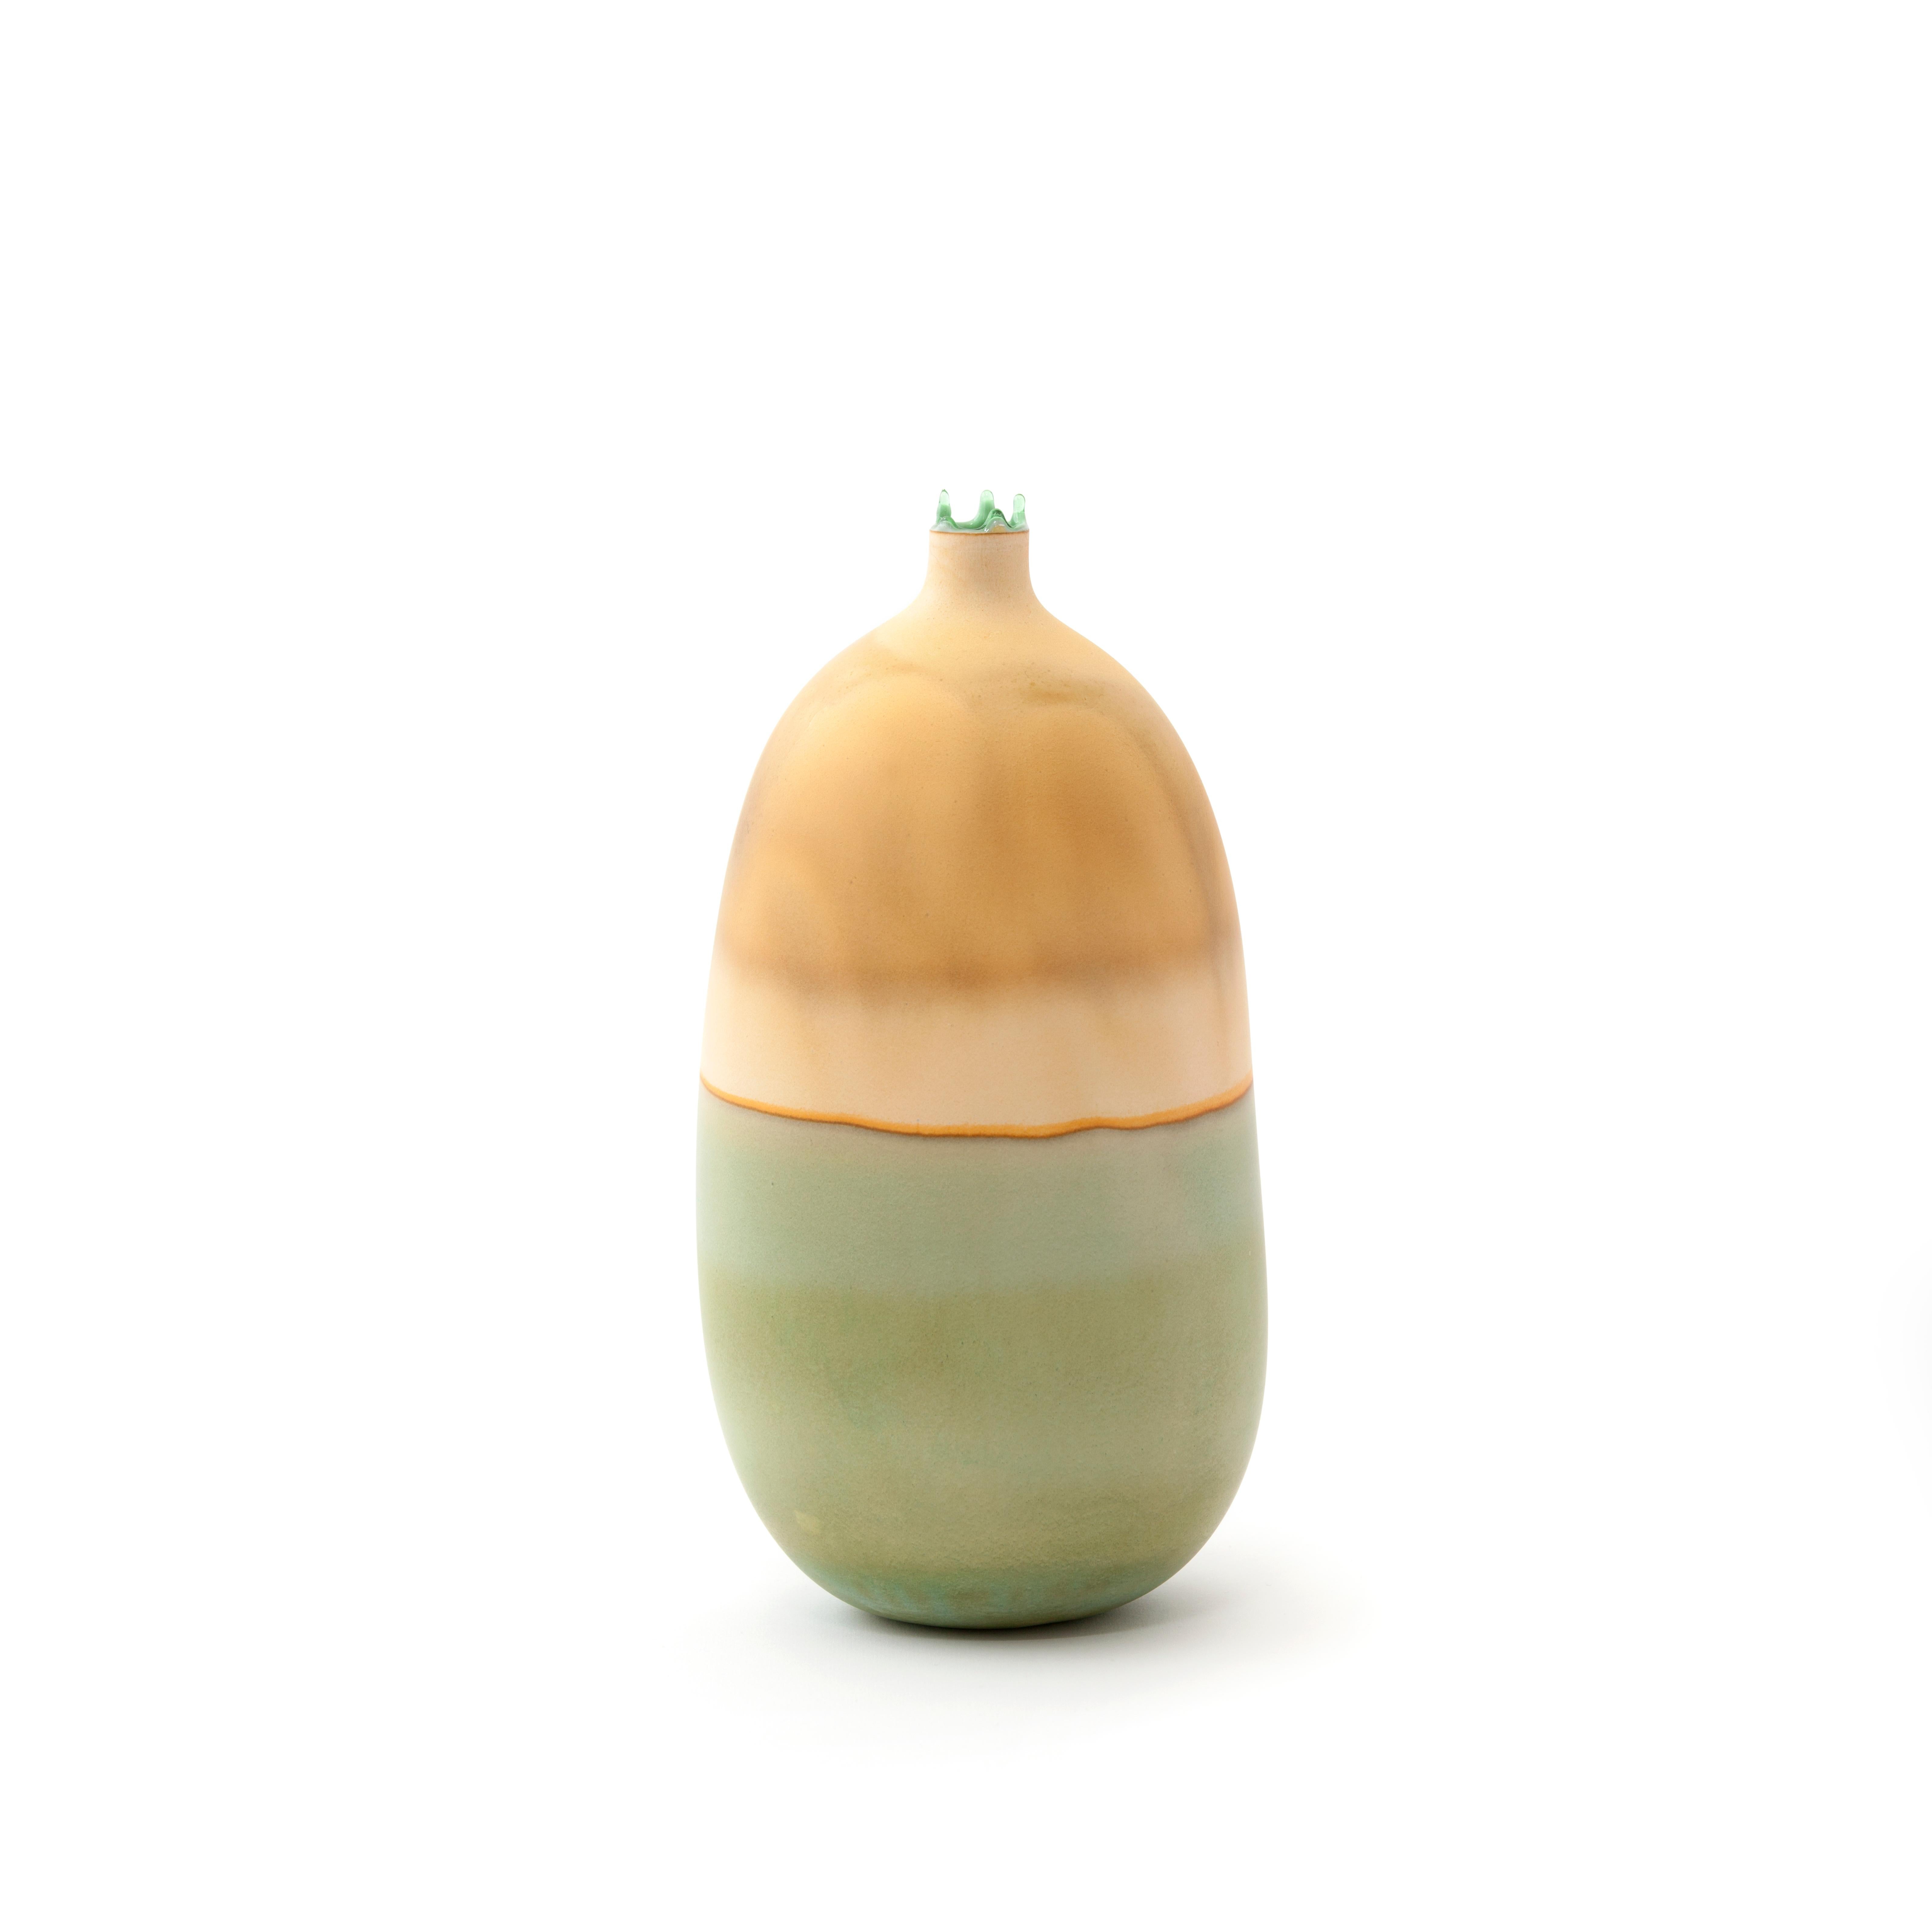 Ochre and Sage Mercury vase by Elyse Graham
Dimensions: W 14 x D 14 x H 25.5cm
Materials: Plaster, Resin
MOLDED, DYED, AND FINISHED BY HAND IN LA. CUSTOMIZATION
AVAILABLE.
ALL PIECES ARE MADE TO ORDER

This collection of vessels is inspired